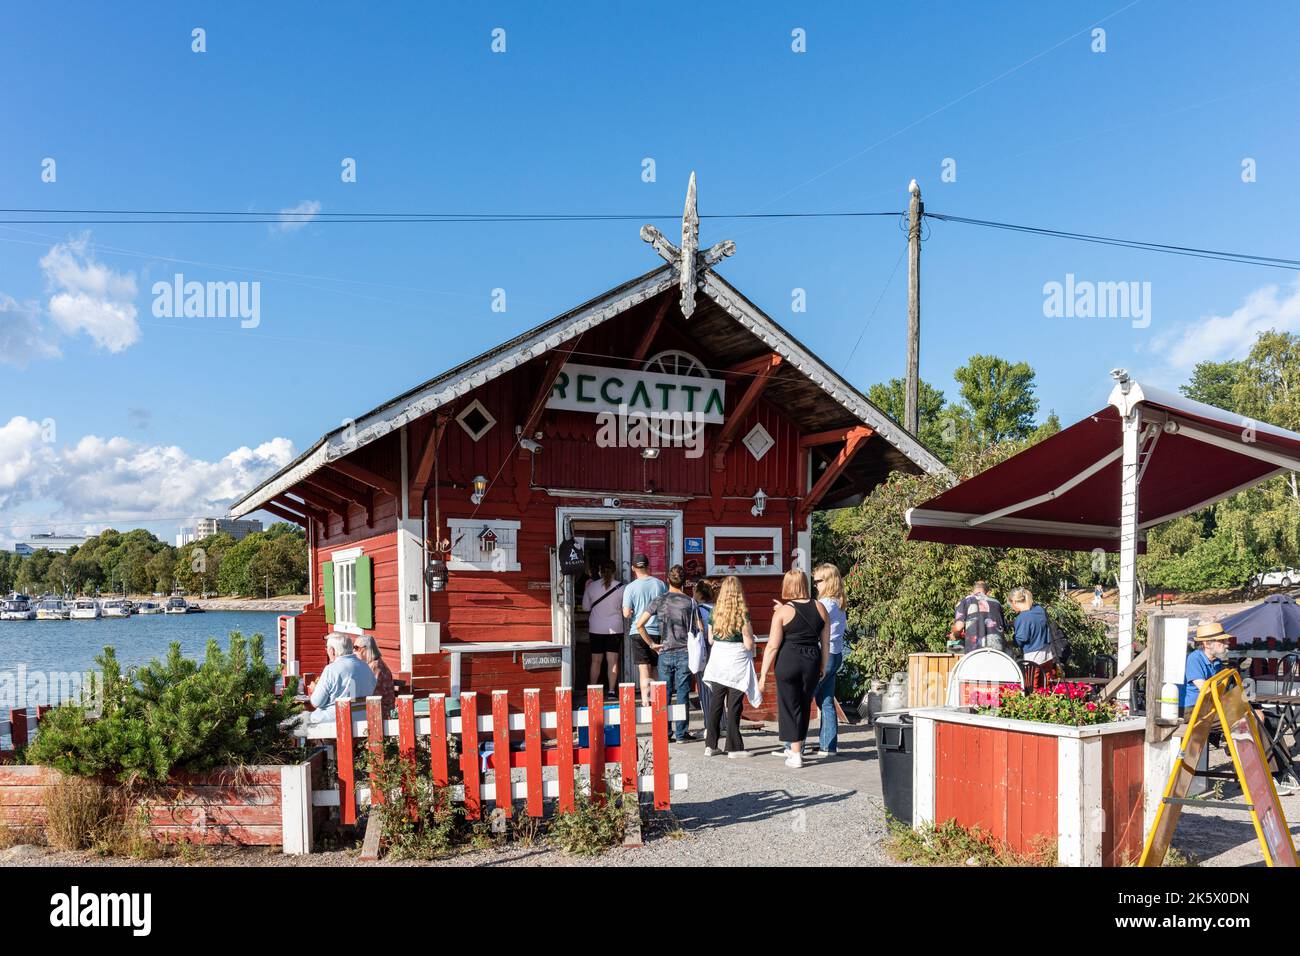 Cafe Regatta, a quirky little outdoor coffee shop by the sea in Helsinki, Finland Stock Photo